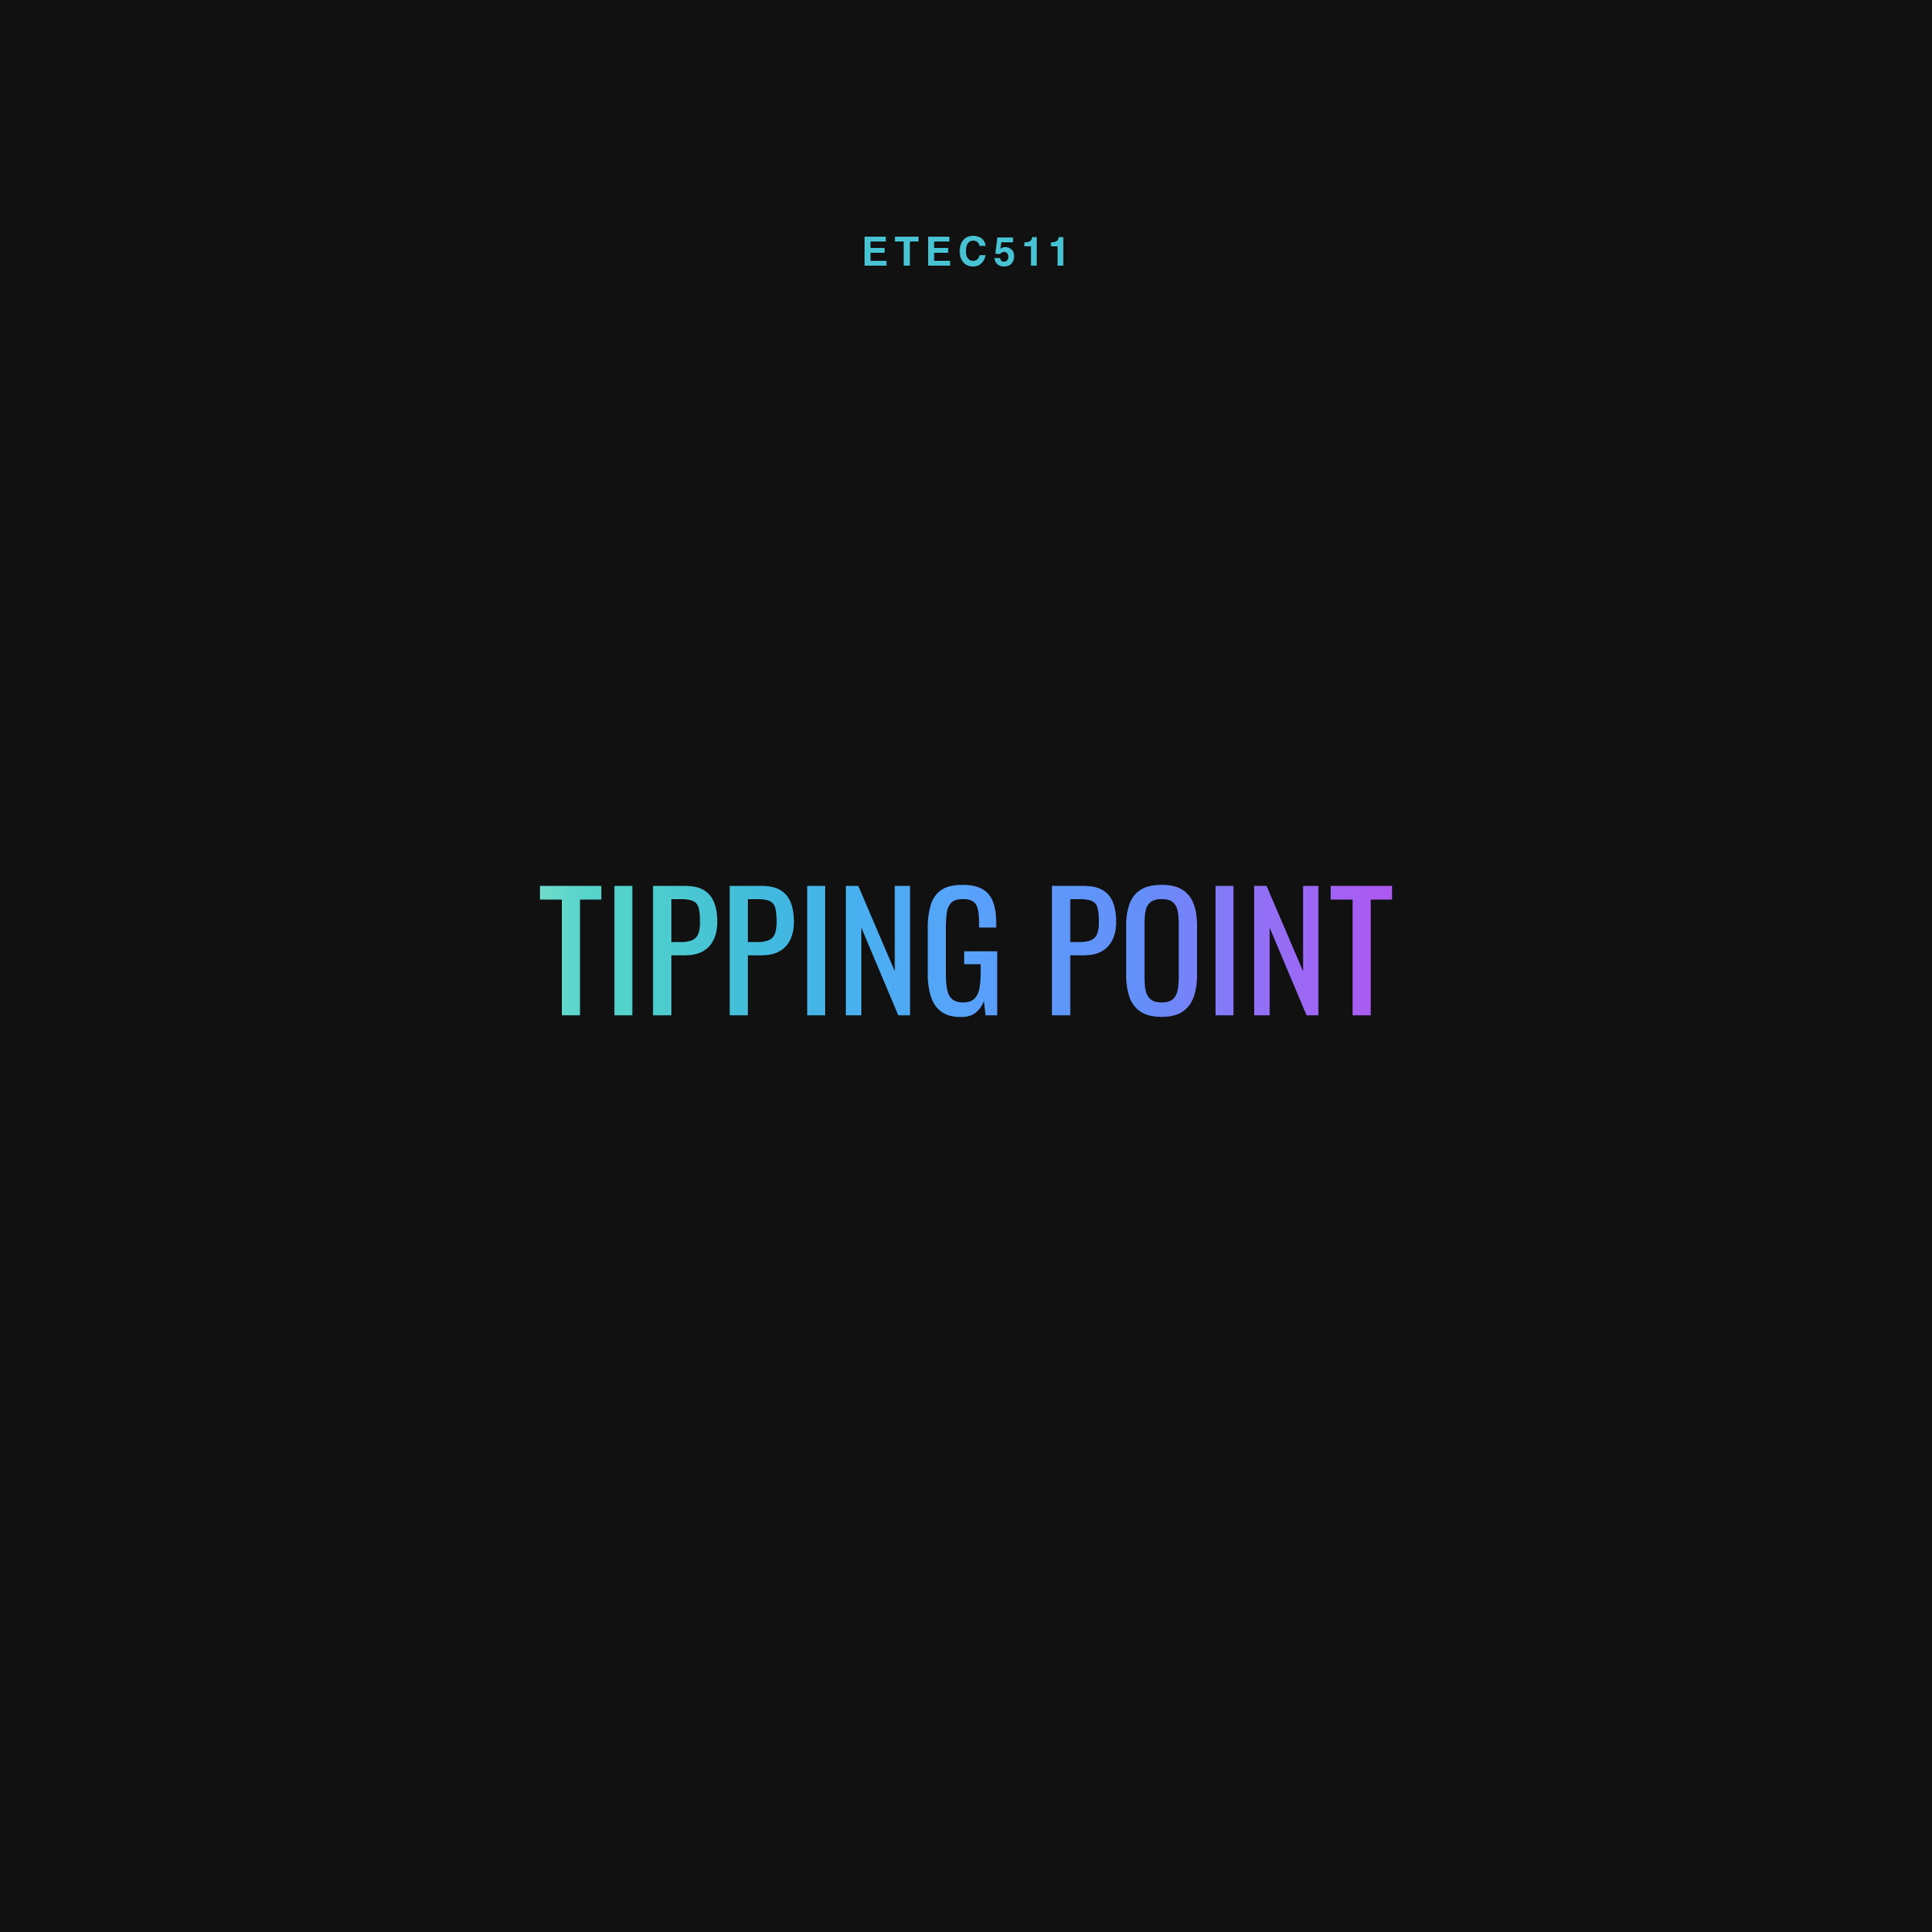 ETEC 511 Tipping Point